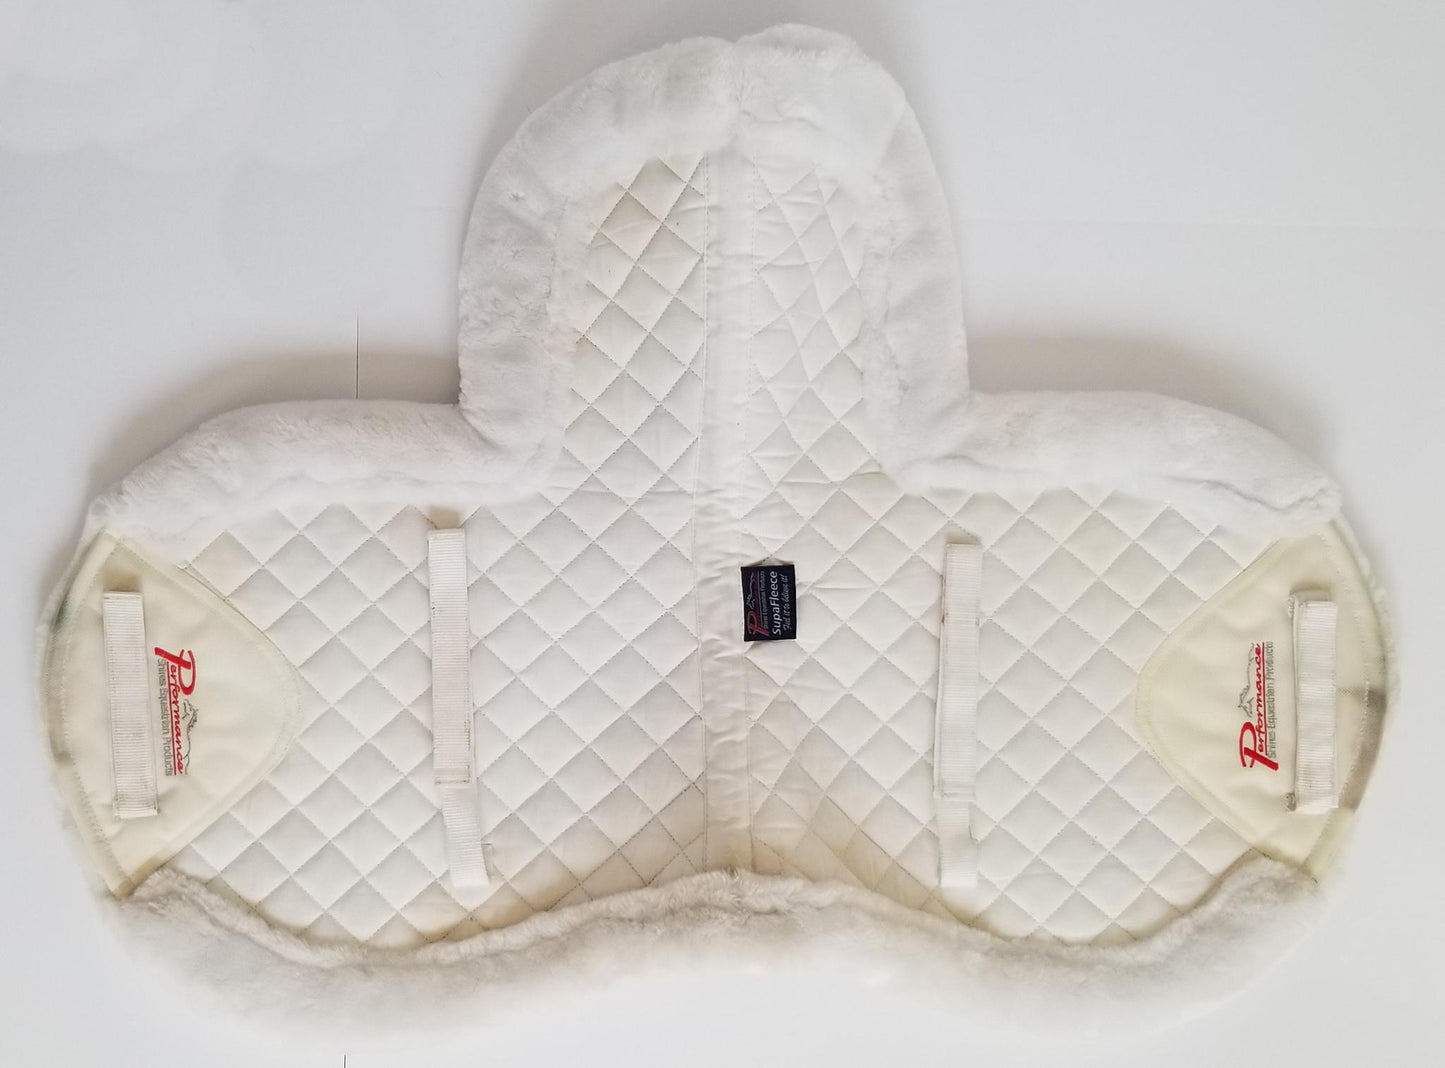 Shires Performance SupaFleece Rimmed Shaped Pad - White - 17"-17.5"